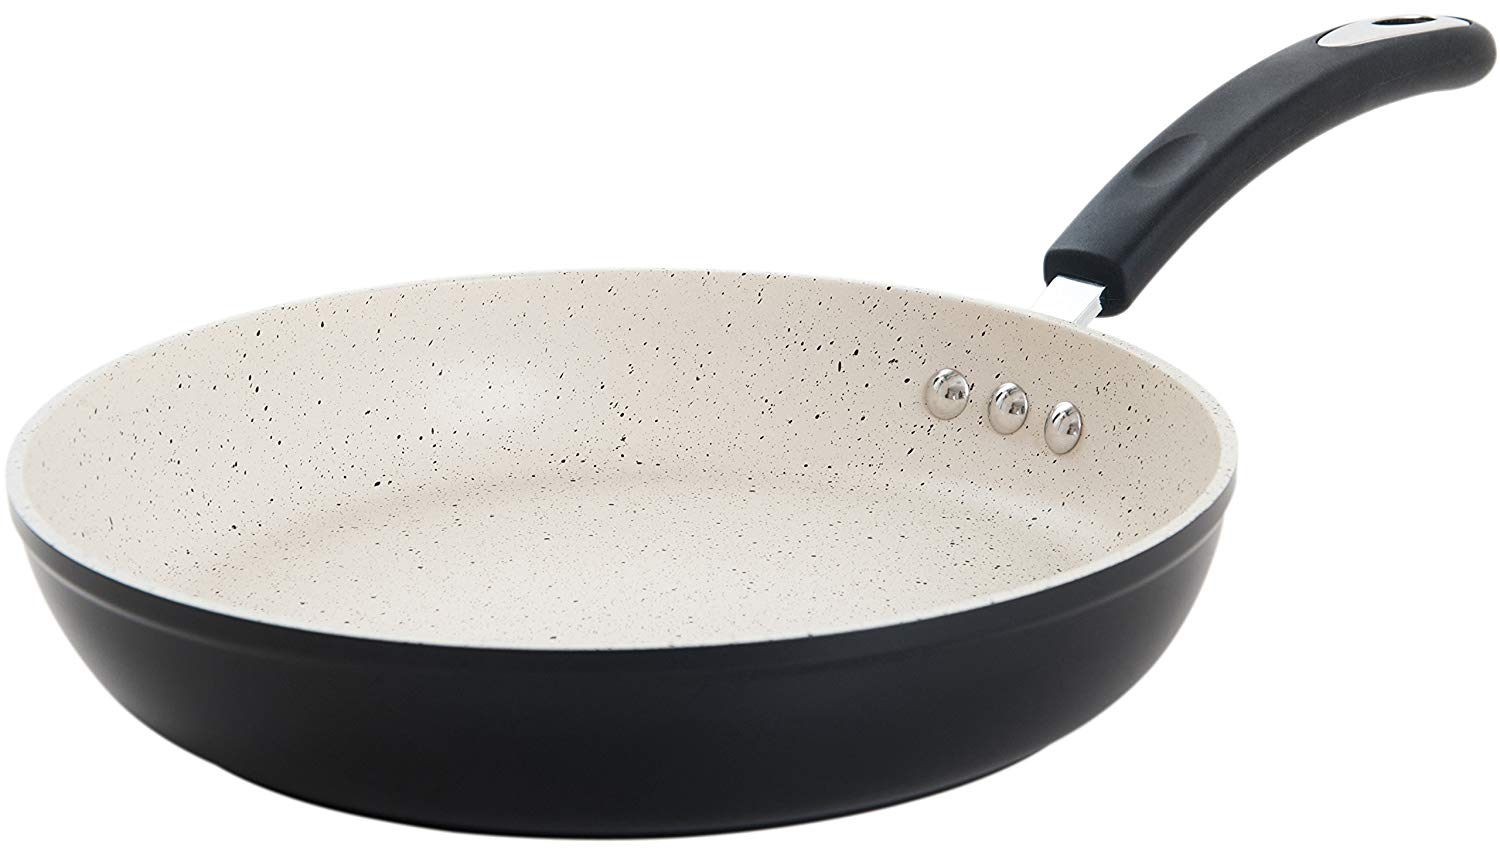 Aluminum Inch Green Cook N Home 02499 8 and 10 Frying Pan Saute Skillet with Nonstick Coating Heavy Gauge